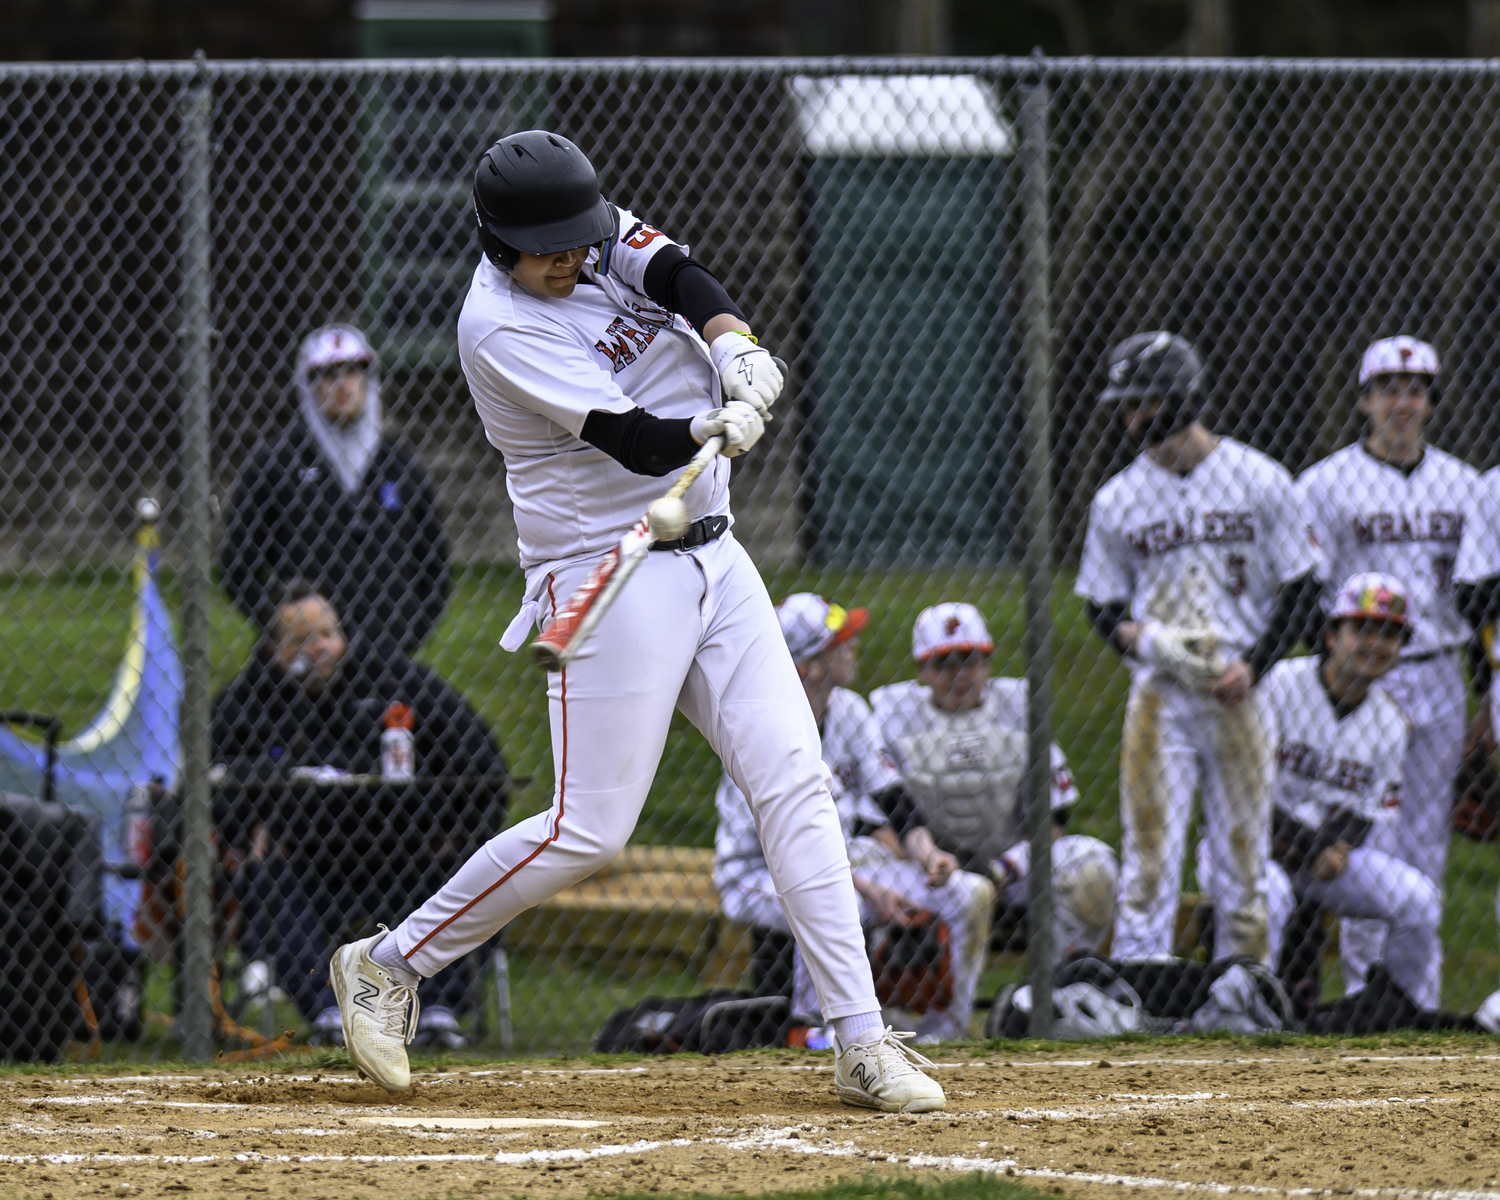 Paul Roesel's base hit in the second inning brought home a pair of runs as part of the Whalers' four-run inning.   MARIANNE BARNETT